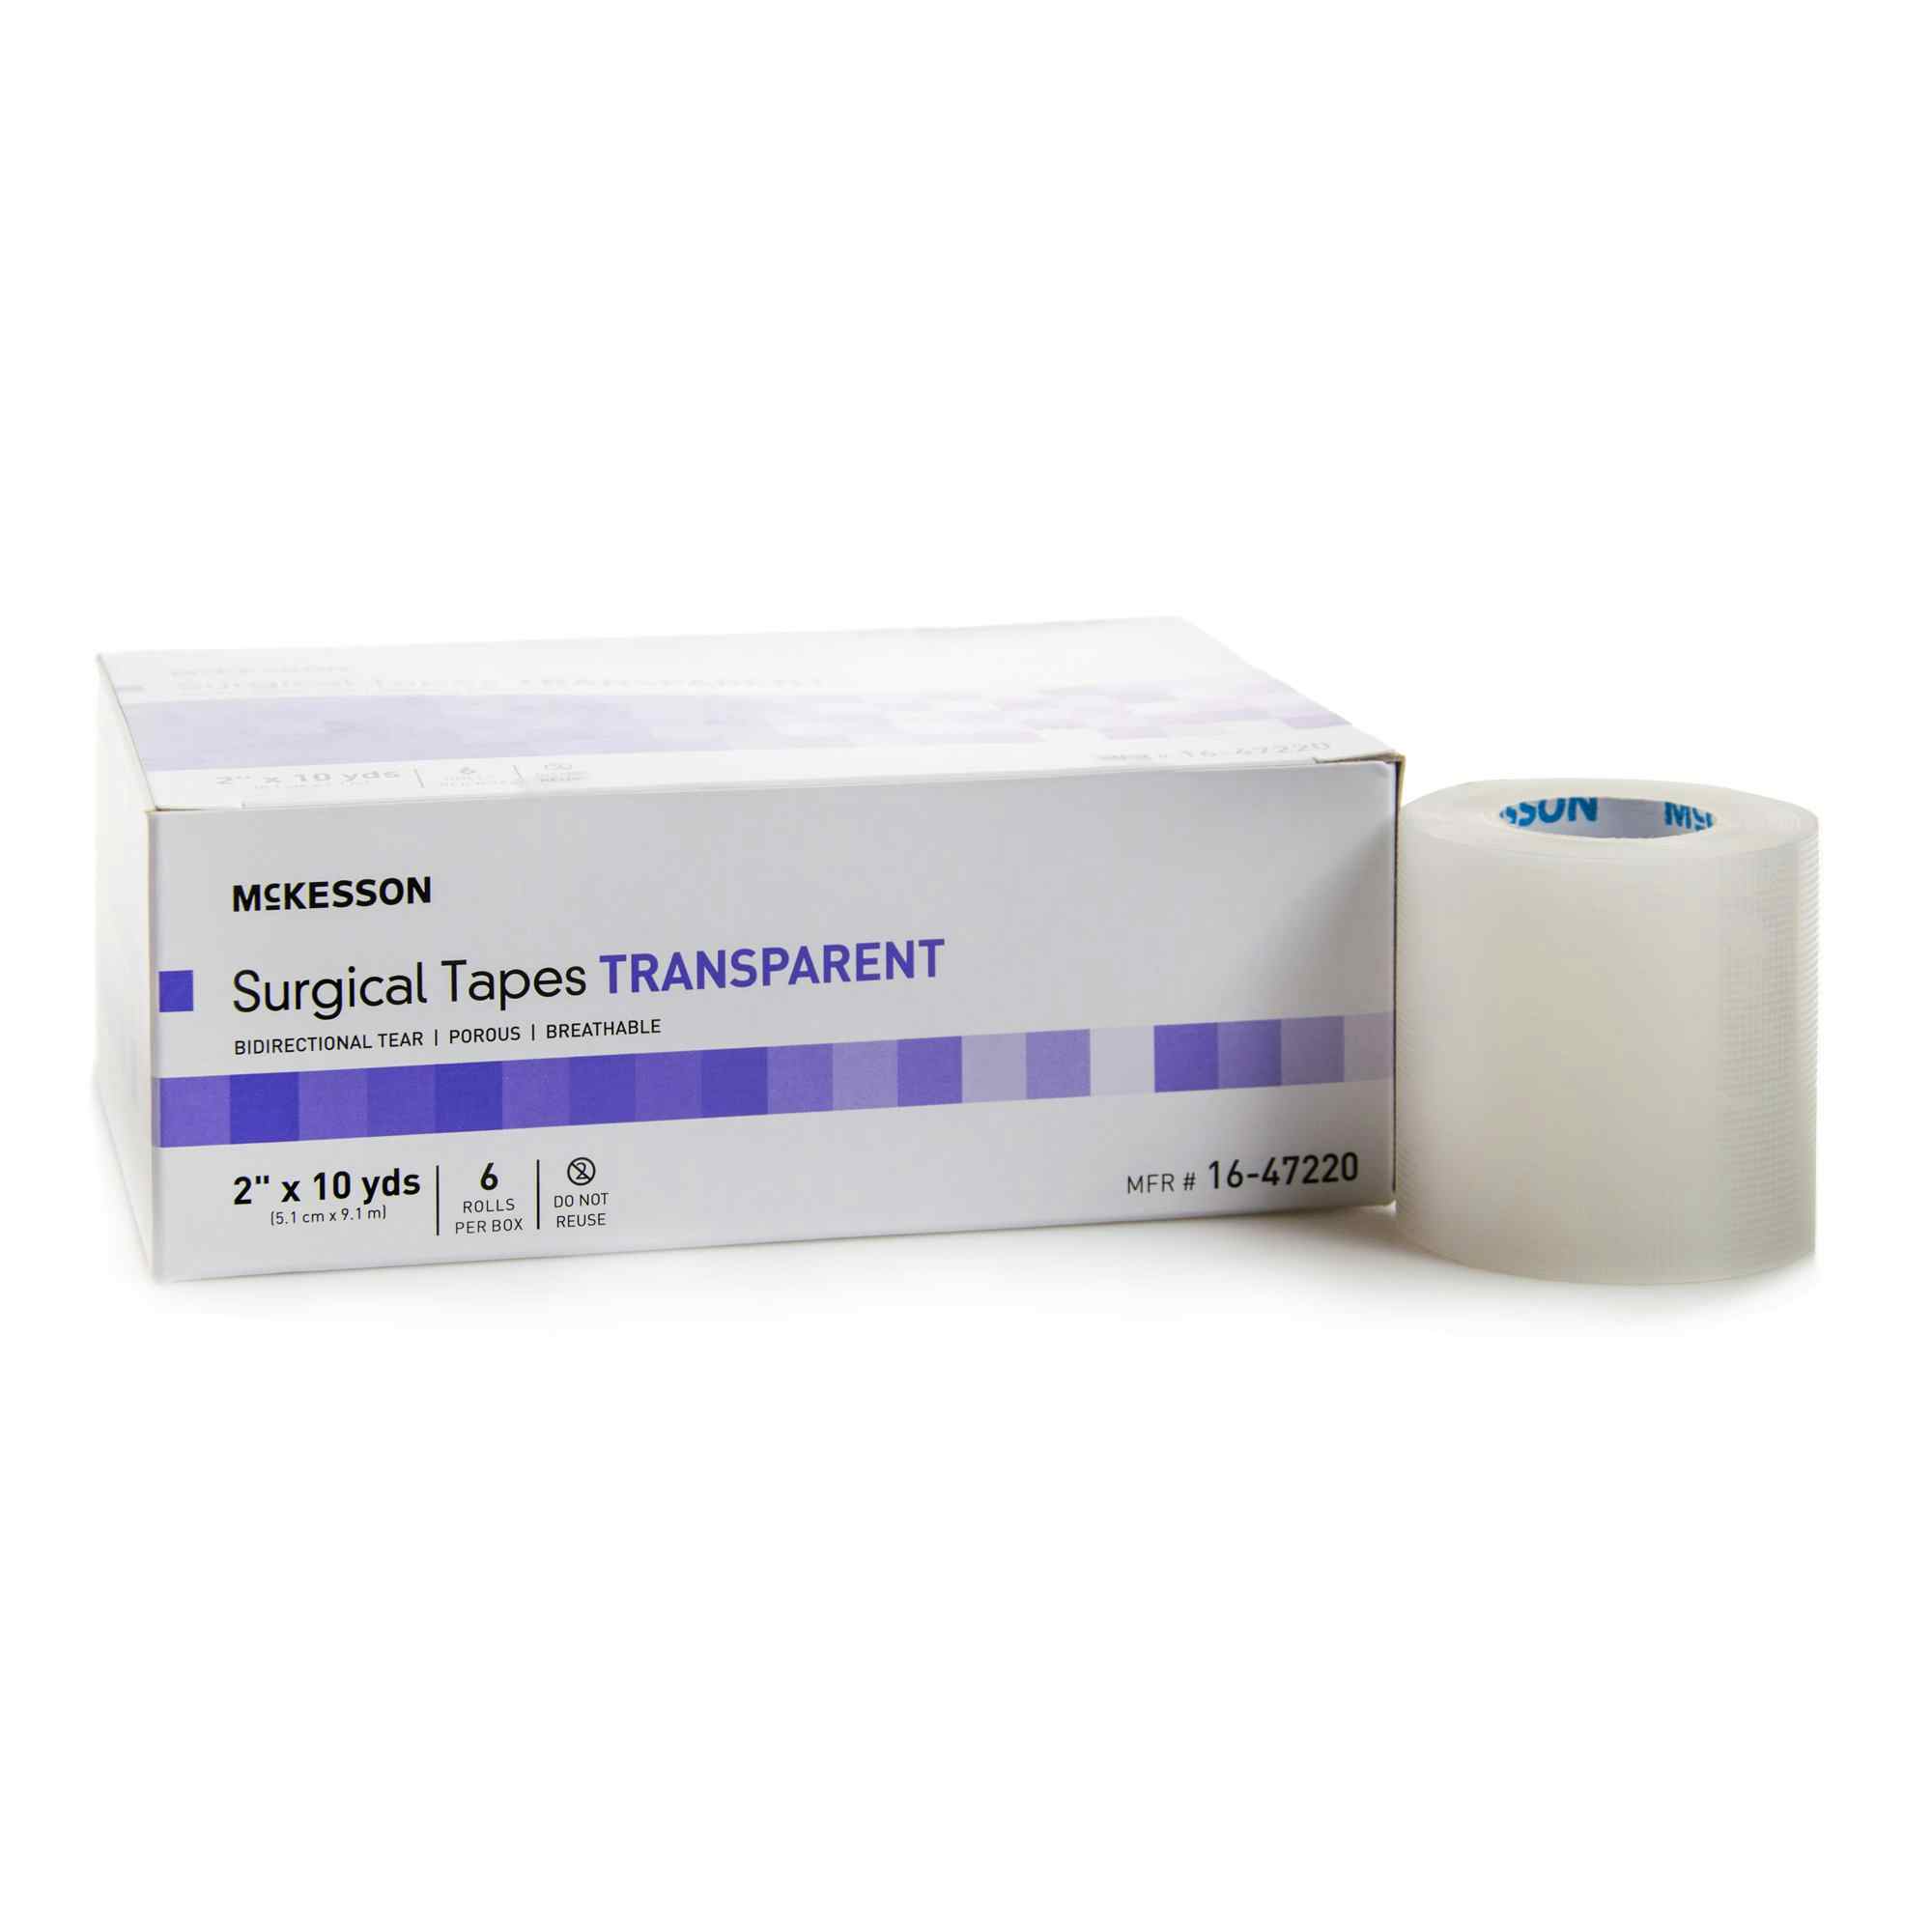 McKesson Transparent Surgical Tape, 2" X 10 yd, 16-47220, Box of 6